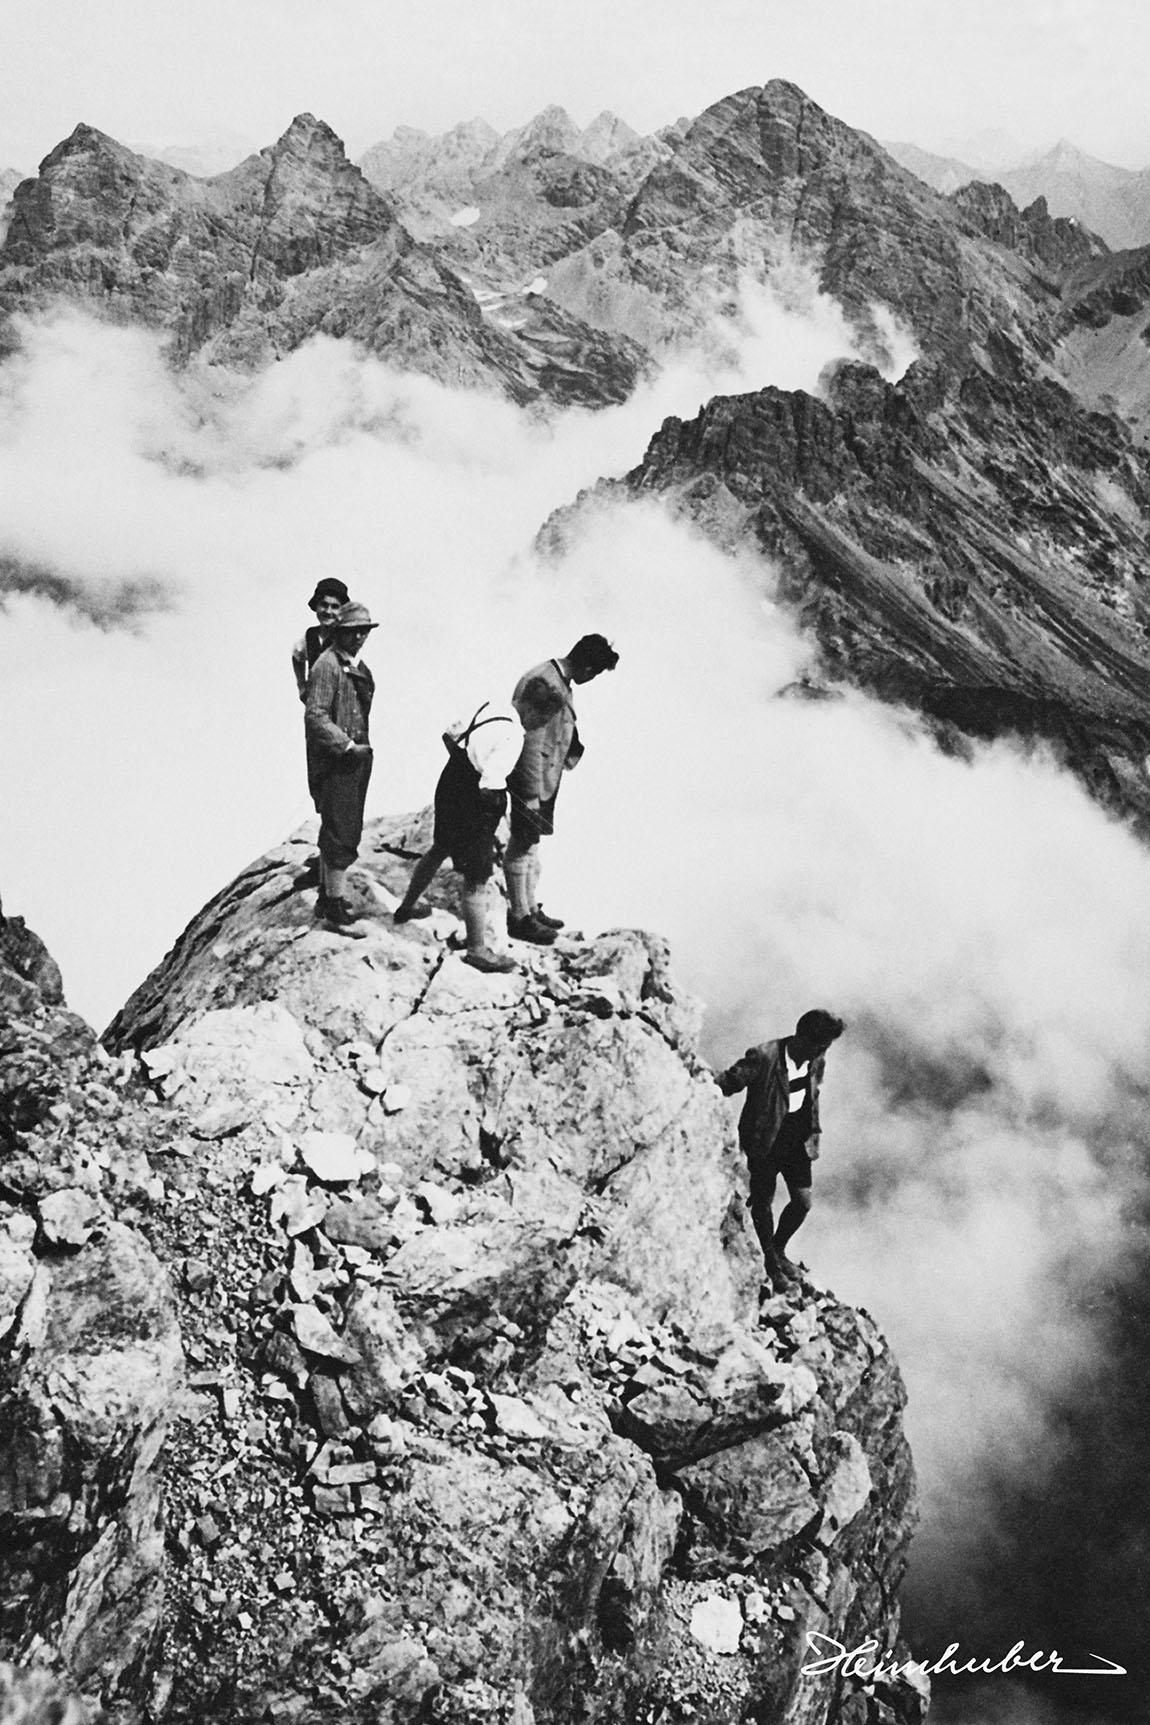 Fotohaus Heimhuber: THE PIONEERS OF MOUNTAIN PHOTOGRAPHY